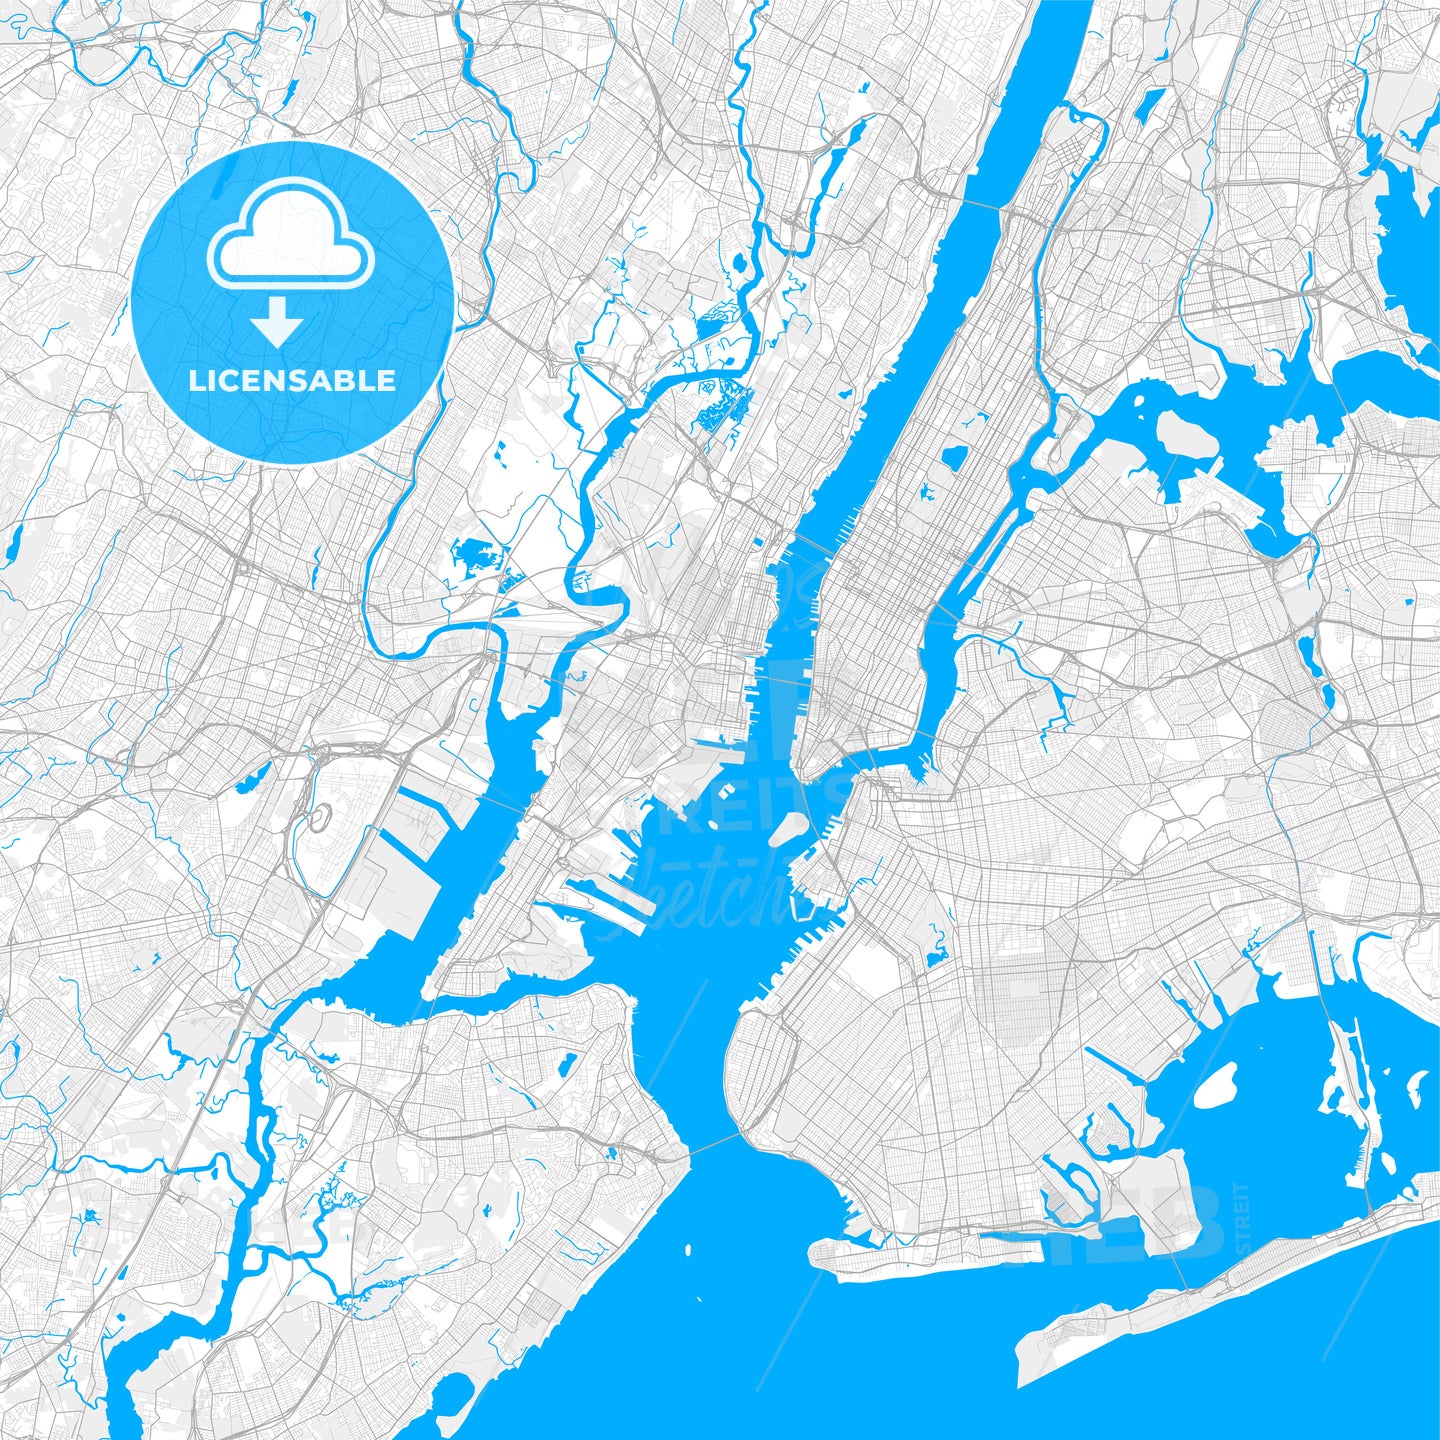 Rich detailed vector map of Jersey City, New Jersey, U.S.A.